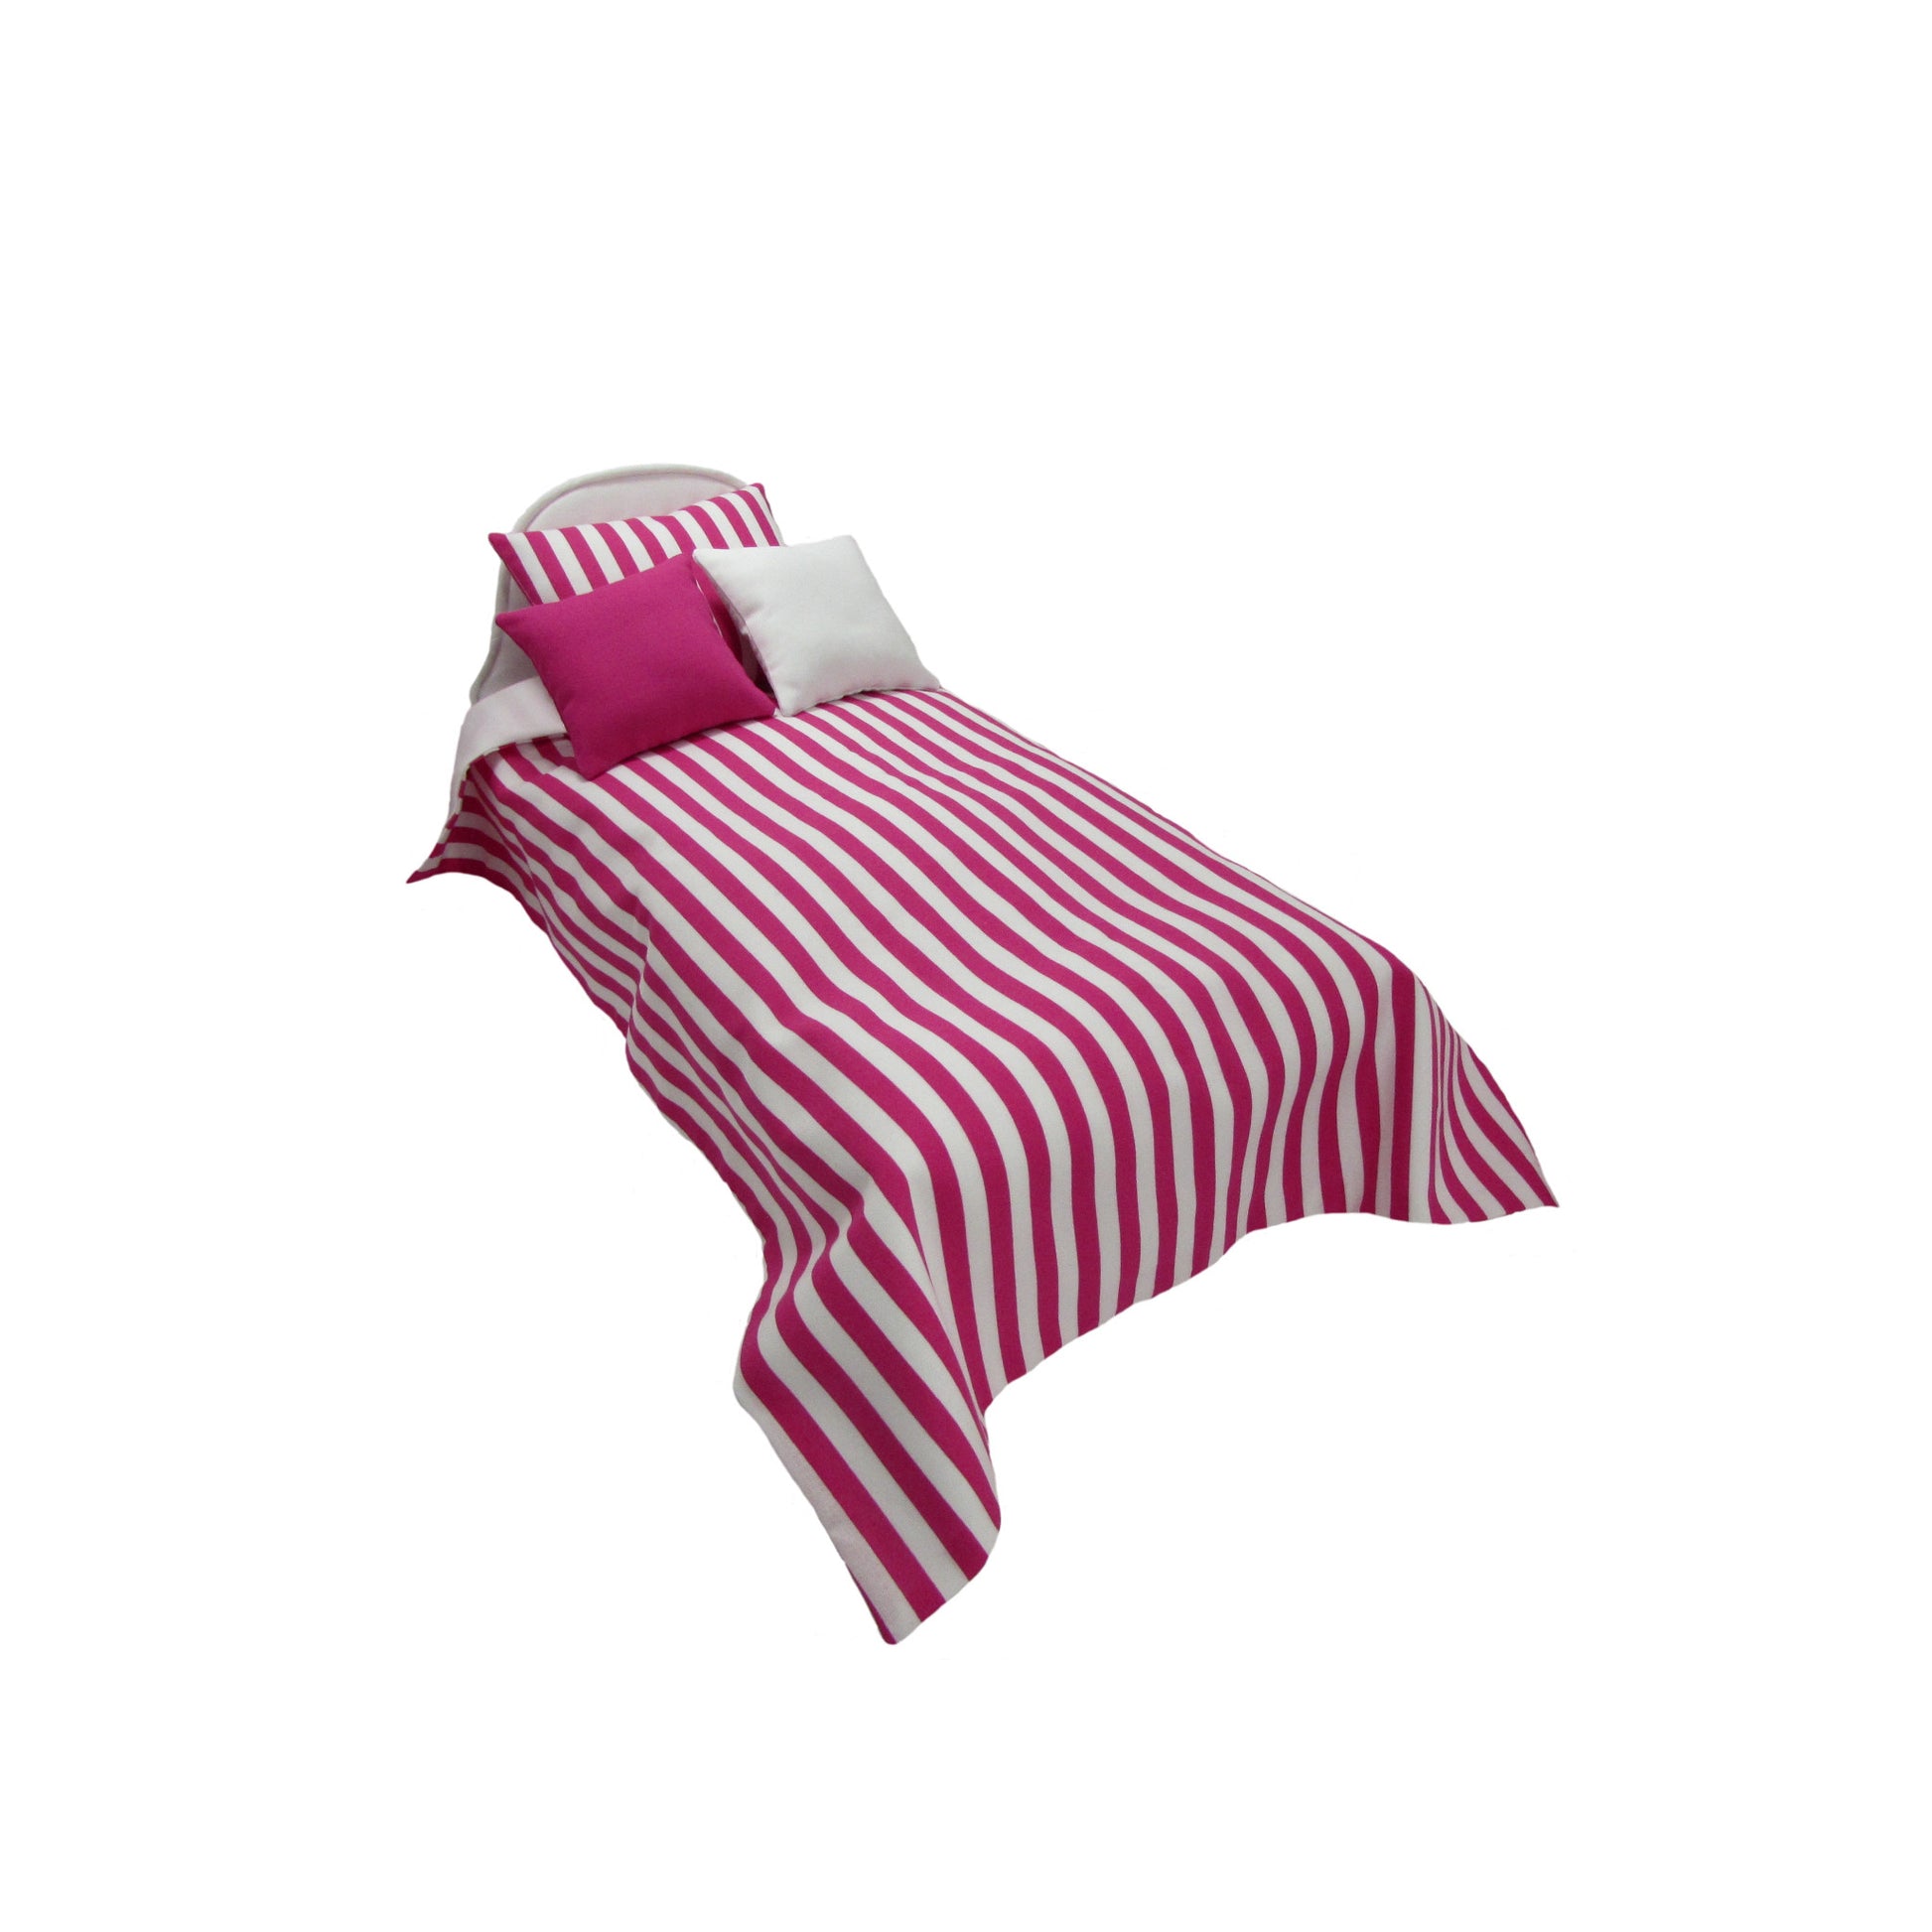 Upholstered White Doll Bed and Pink White Stripes Doll Bed and Bedding for 14.5-inch dolls